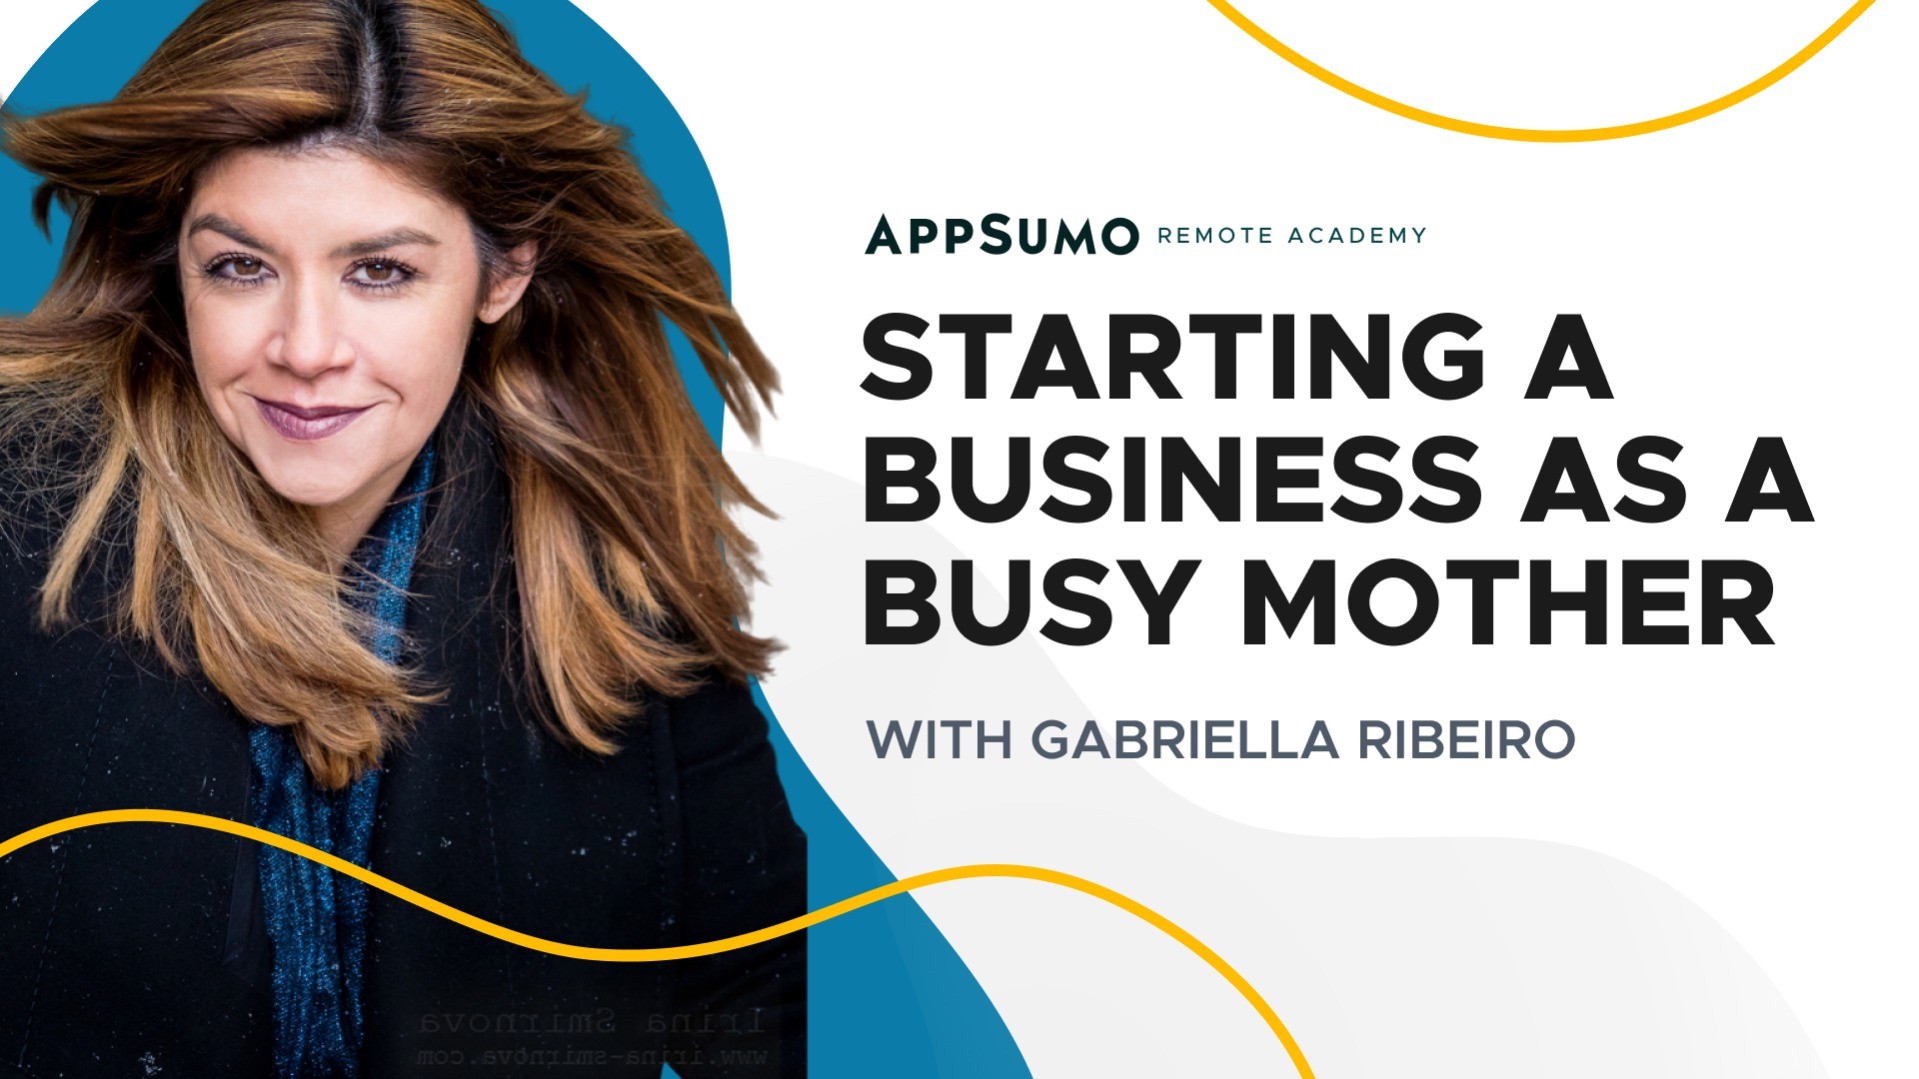 AppSumo Deal for Remote Work Academy: Starting a Business as a Busy Mother - Plus Exclusive